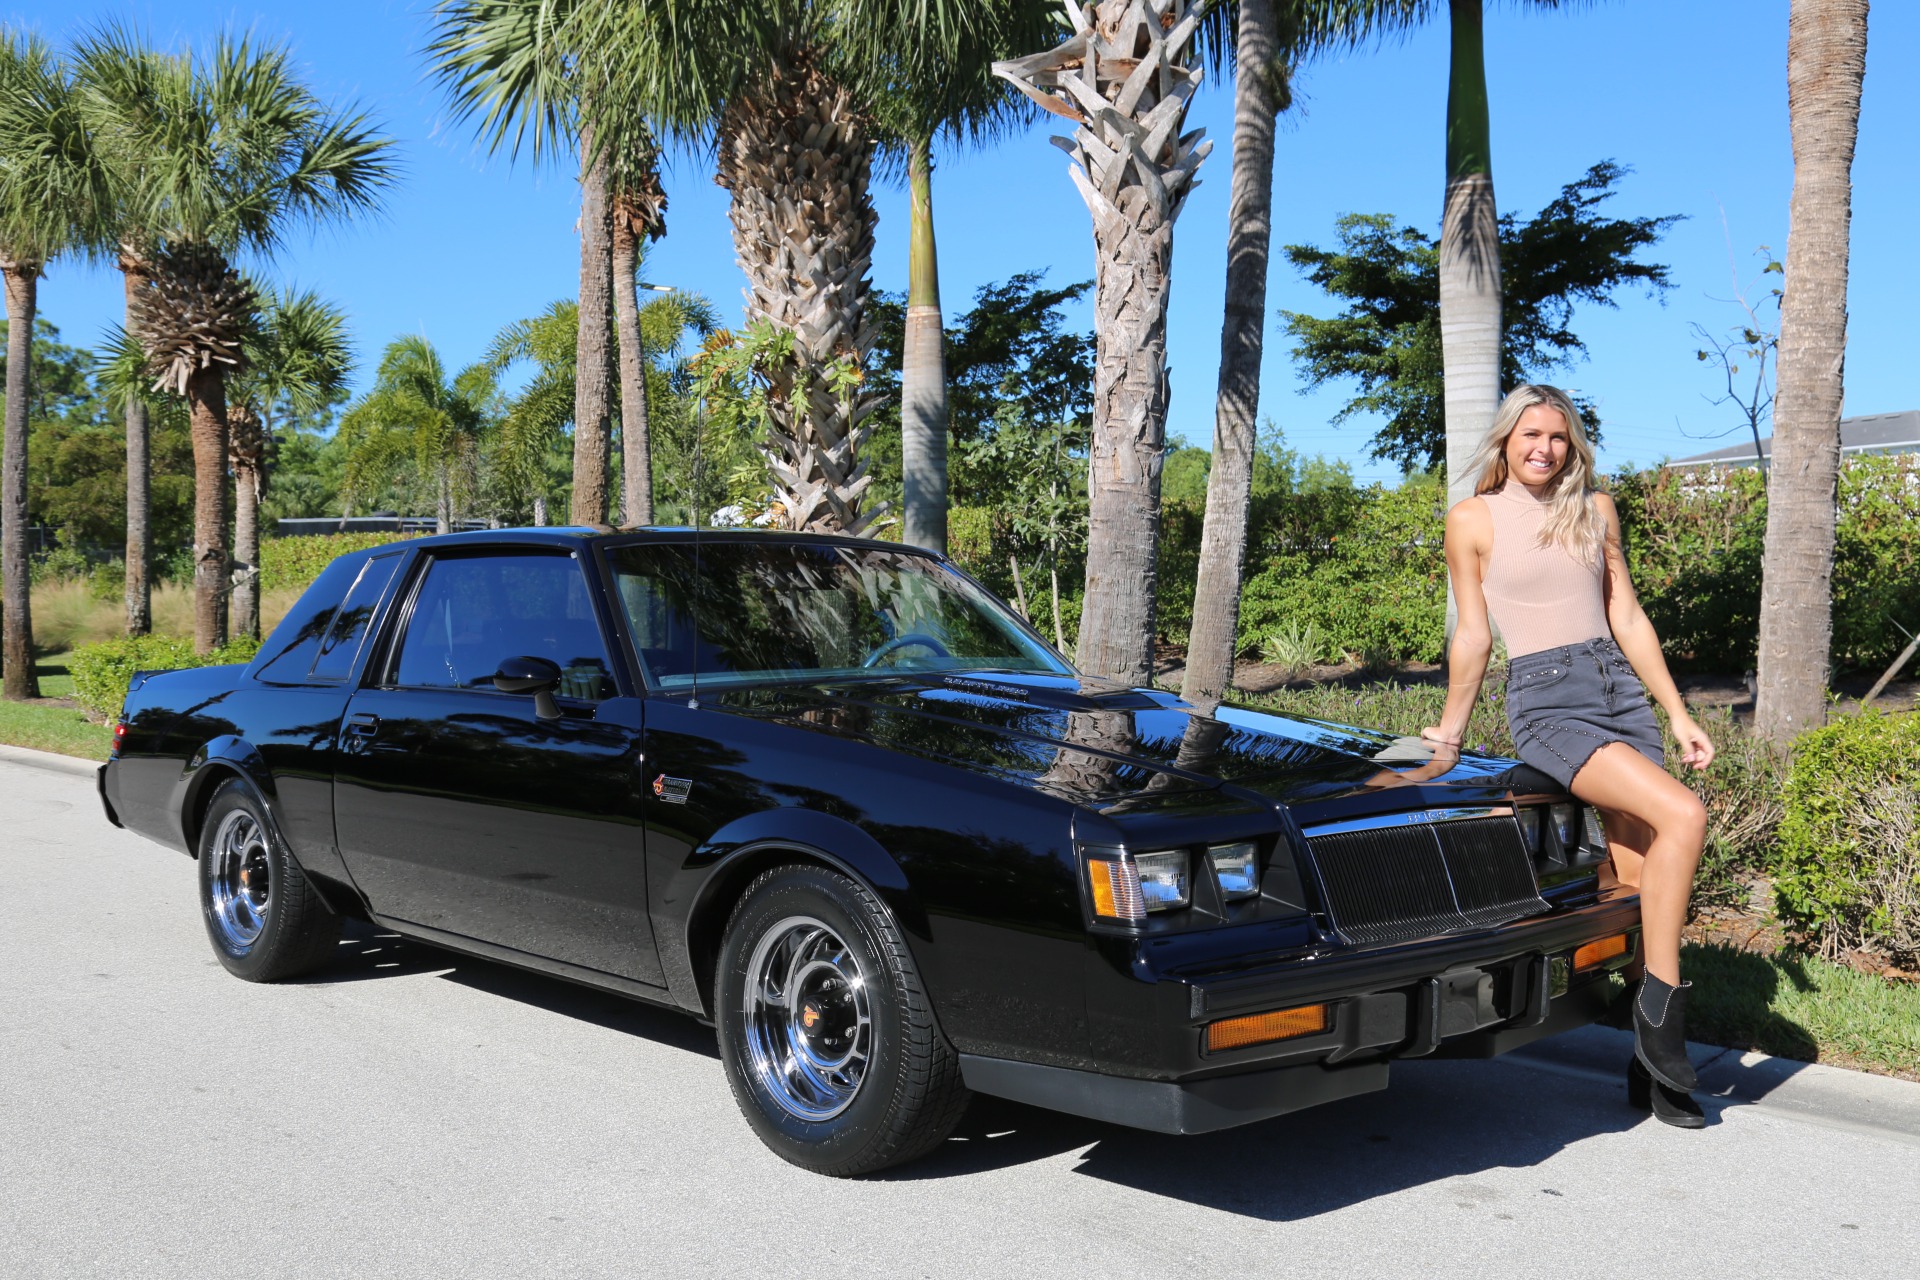 Used 1986 Buick Grand National Turbo Grand National Turbo for sale Sold at Muscle Cars for Sale Inc. in Fort Myers FL 33912 1